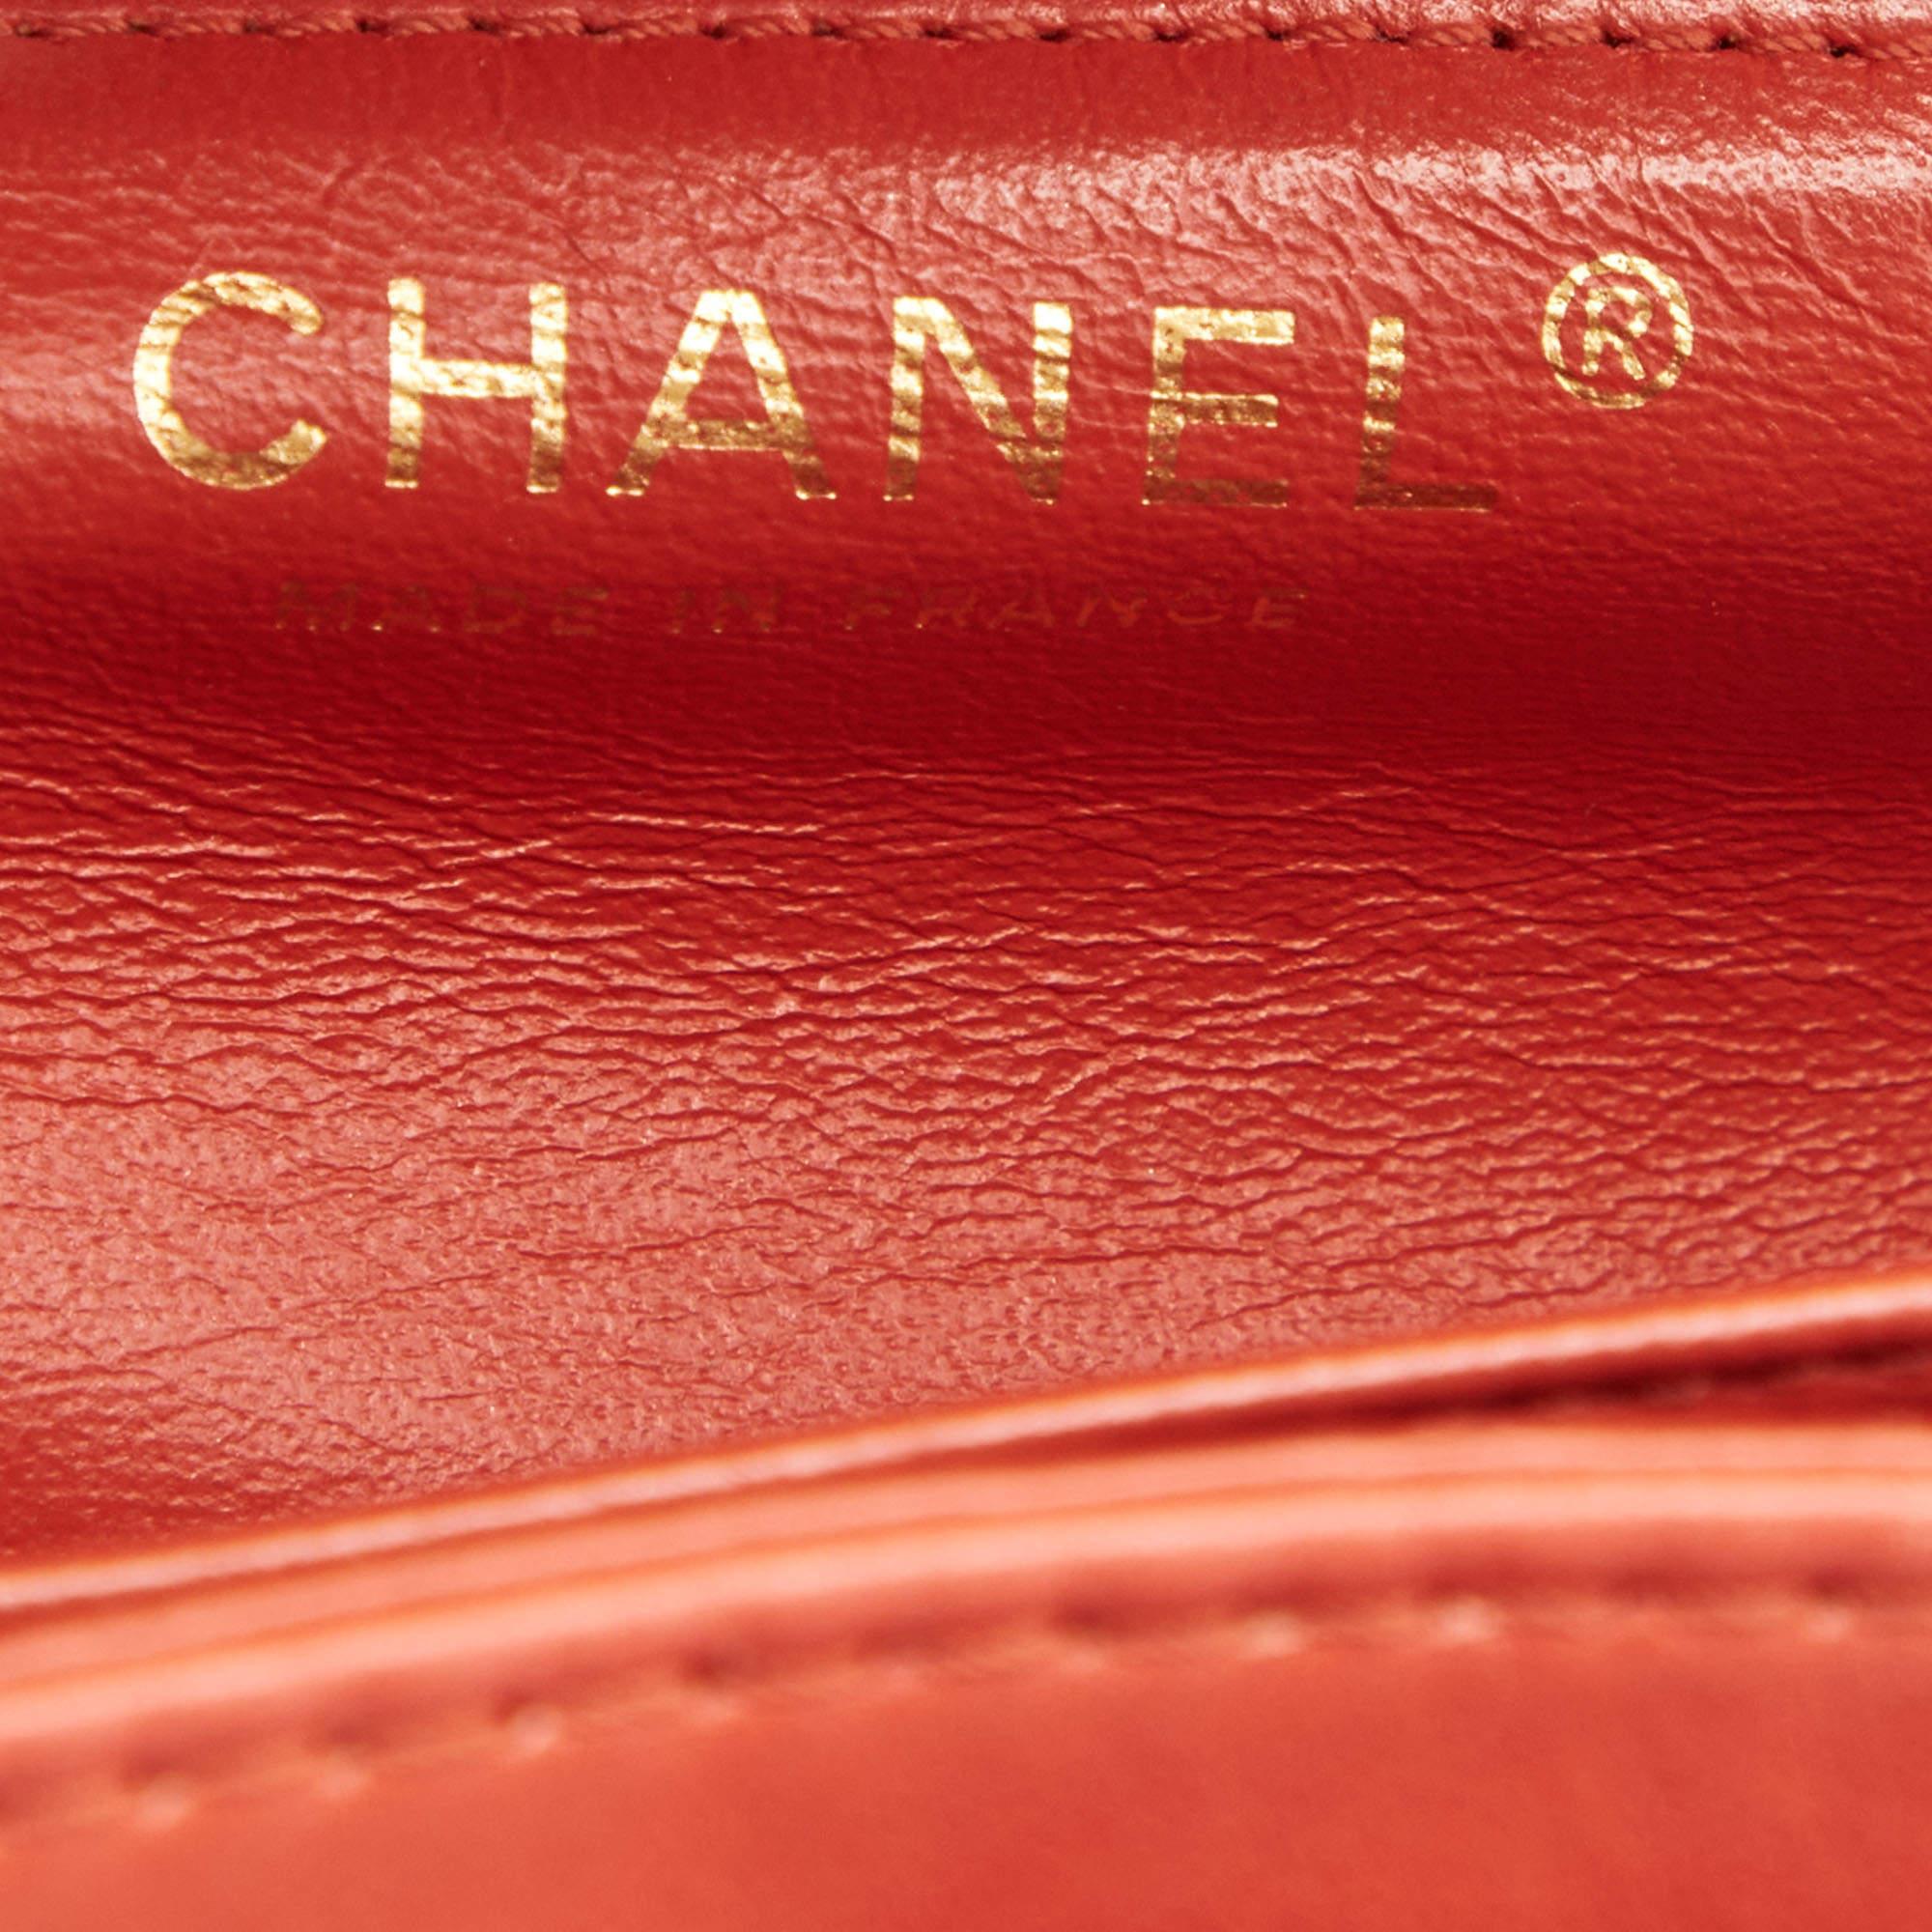 Chanel Red Patent Leather Reissue Double Compartment Flap Bag For Sale 7